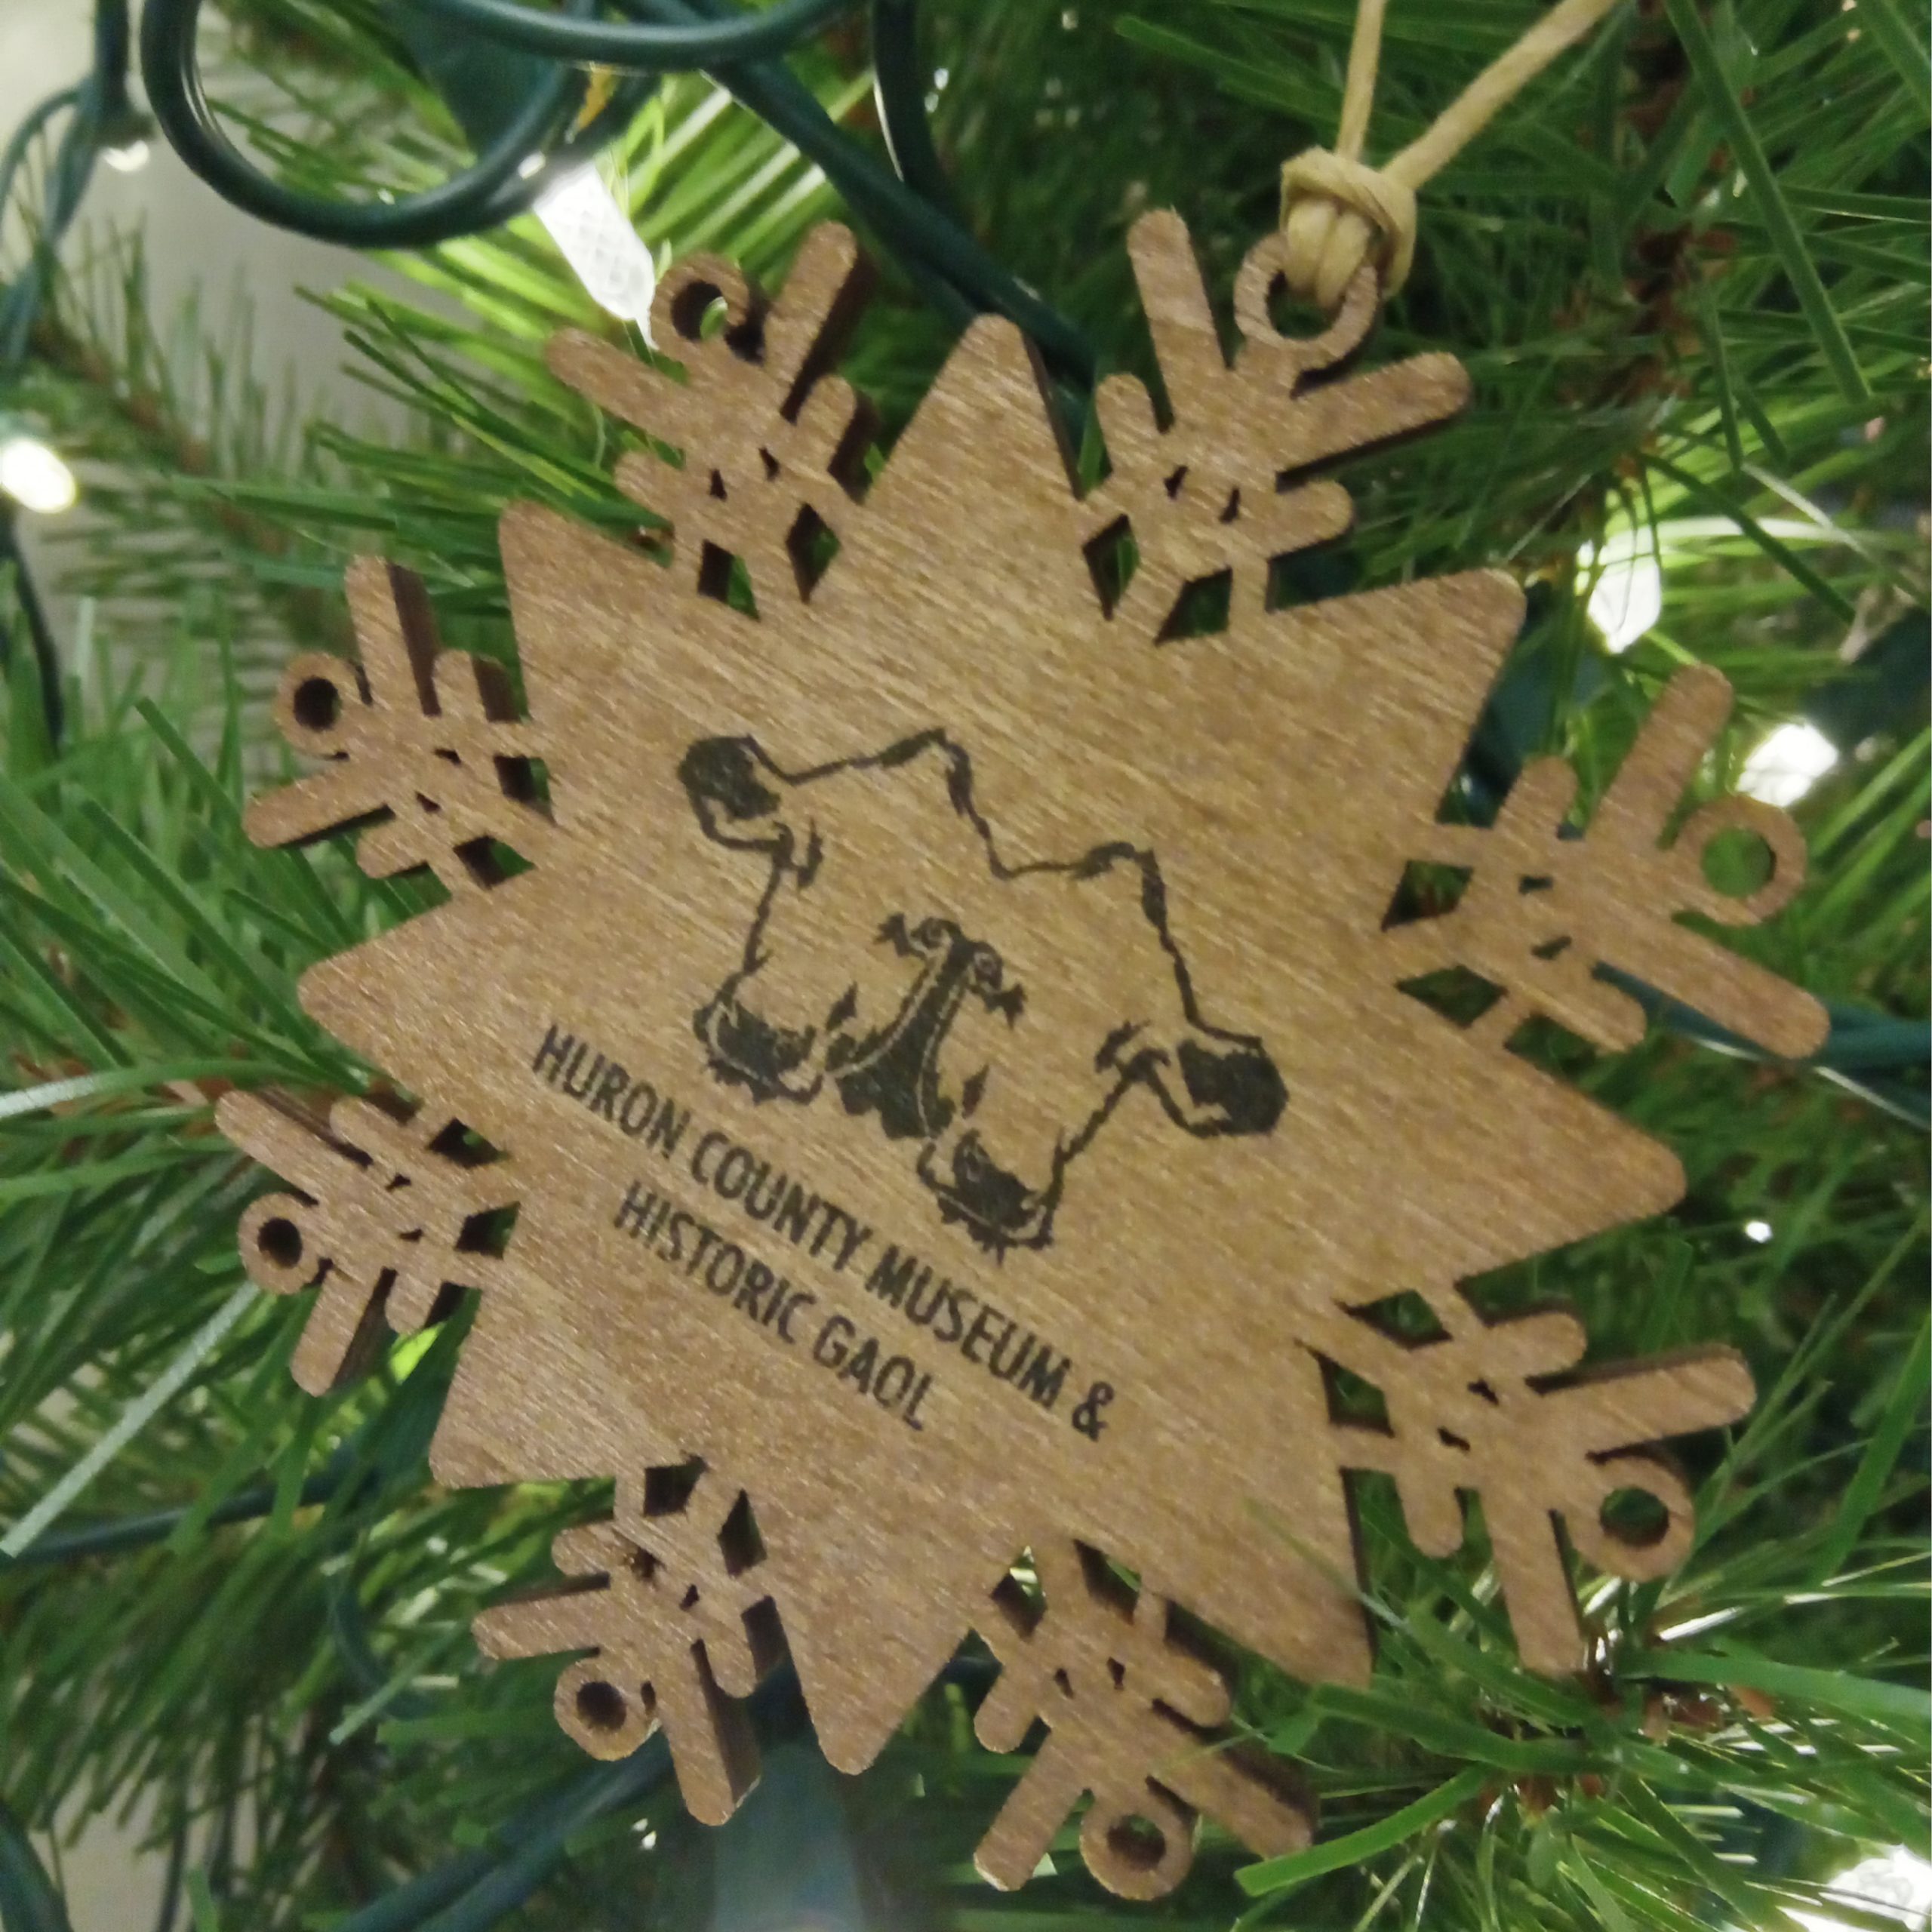 Wooden ornament in the shape of a snowflake with an illustration of the Museum's two-headed calf on the front.